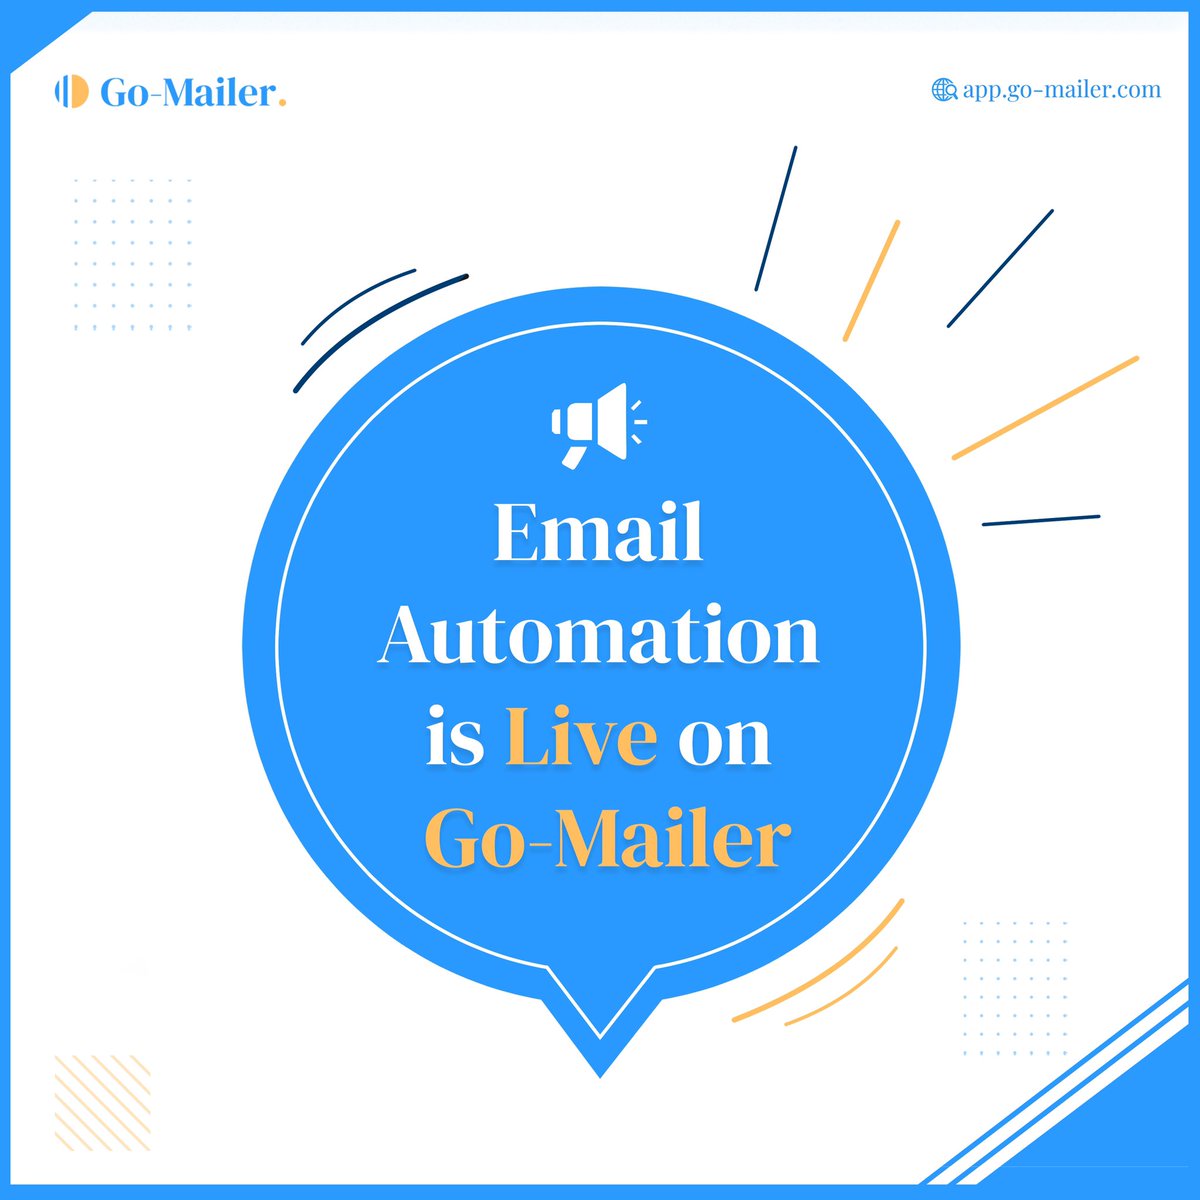 “It’s official: Email automation is now live!
- Track your growth 
- Reach your customers at the right place and time, every time
- Increase conversions 10x faster

Begin your journey to success today. Link in bio
.

#gomailerautomation #gomailer #emailautomation #emailmarketing